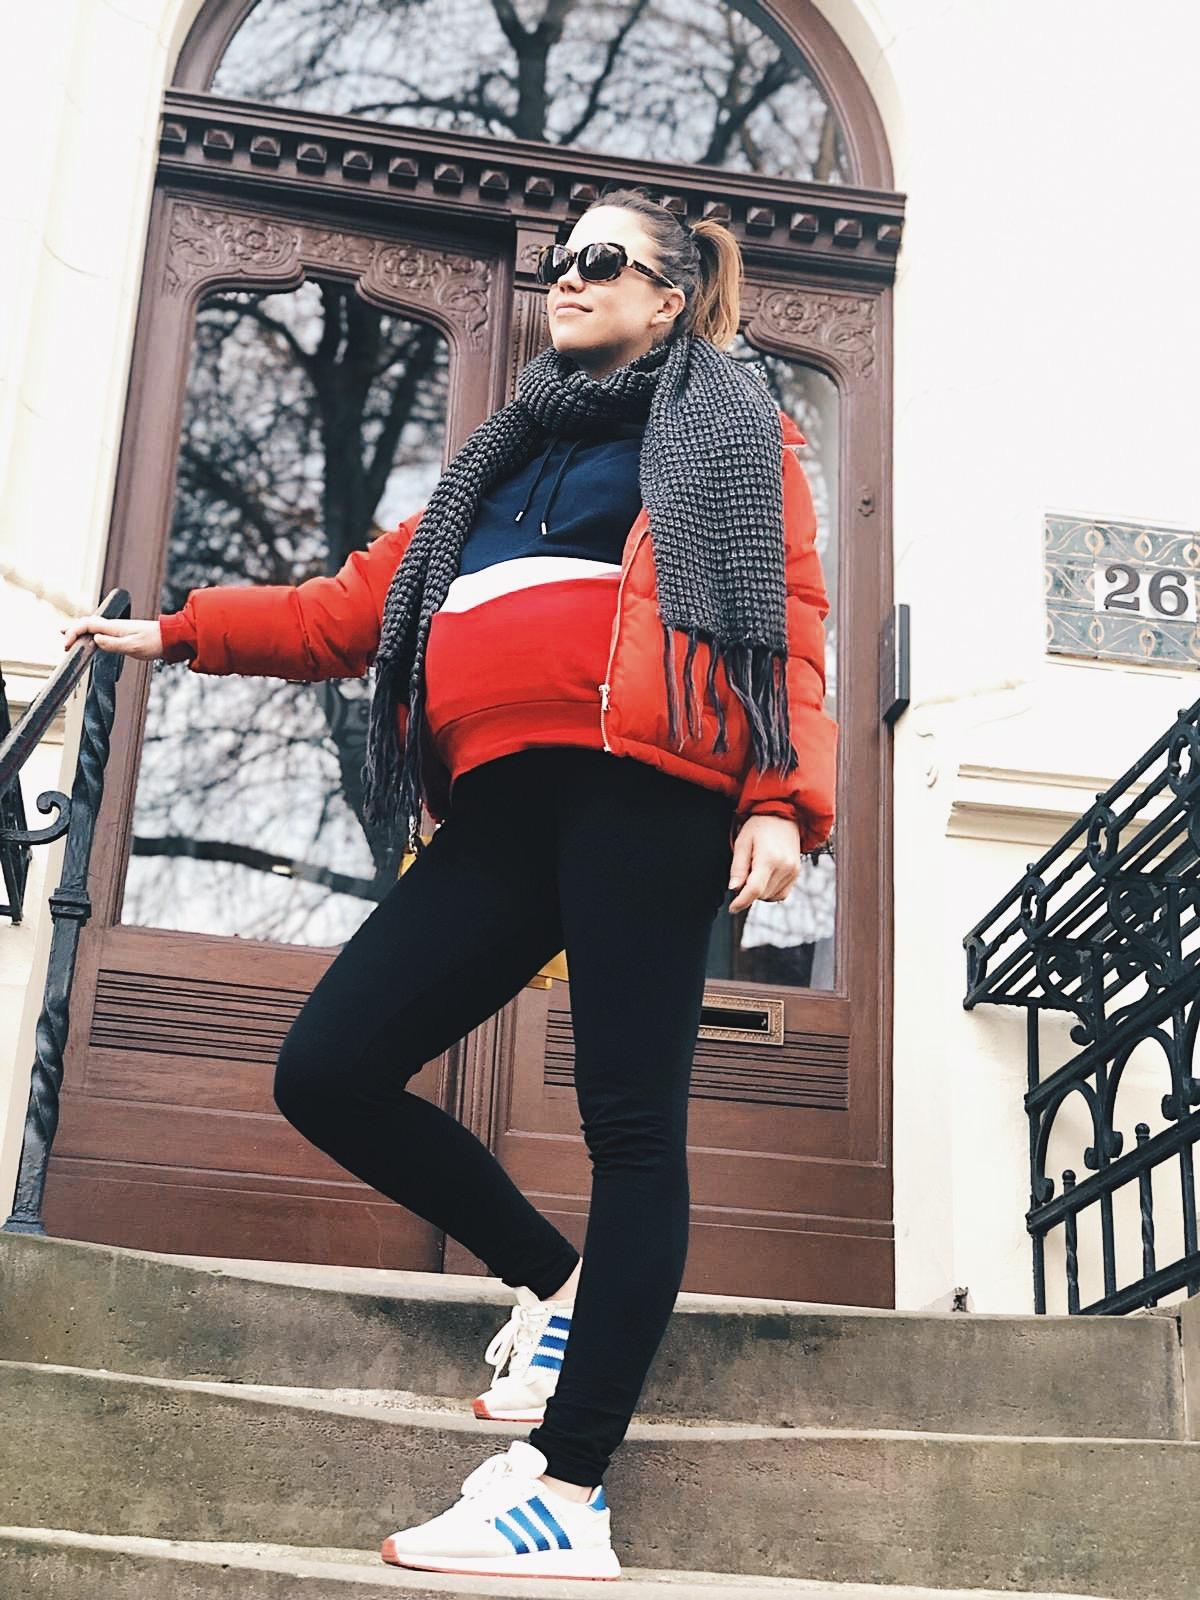 Hello Sunshine 😎 #ootd #pregnant #babybump #colourful #springlook #outfitoftheday #sneaker